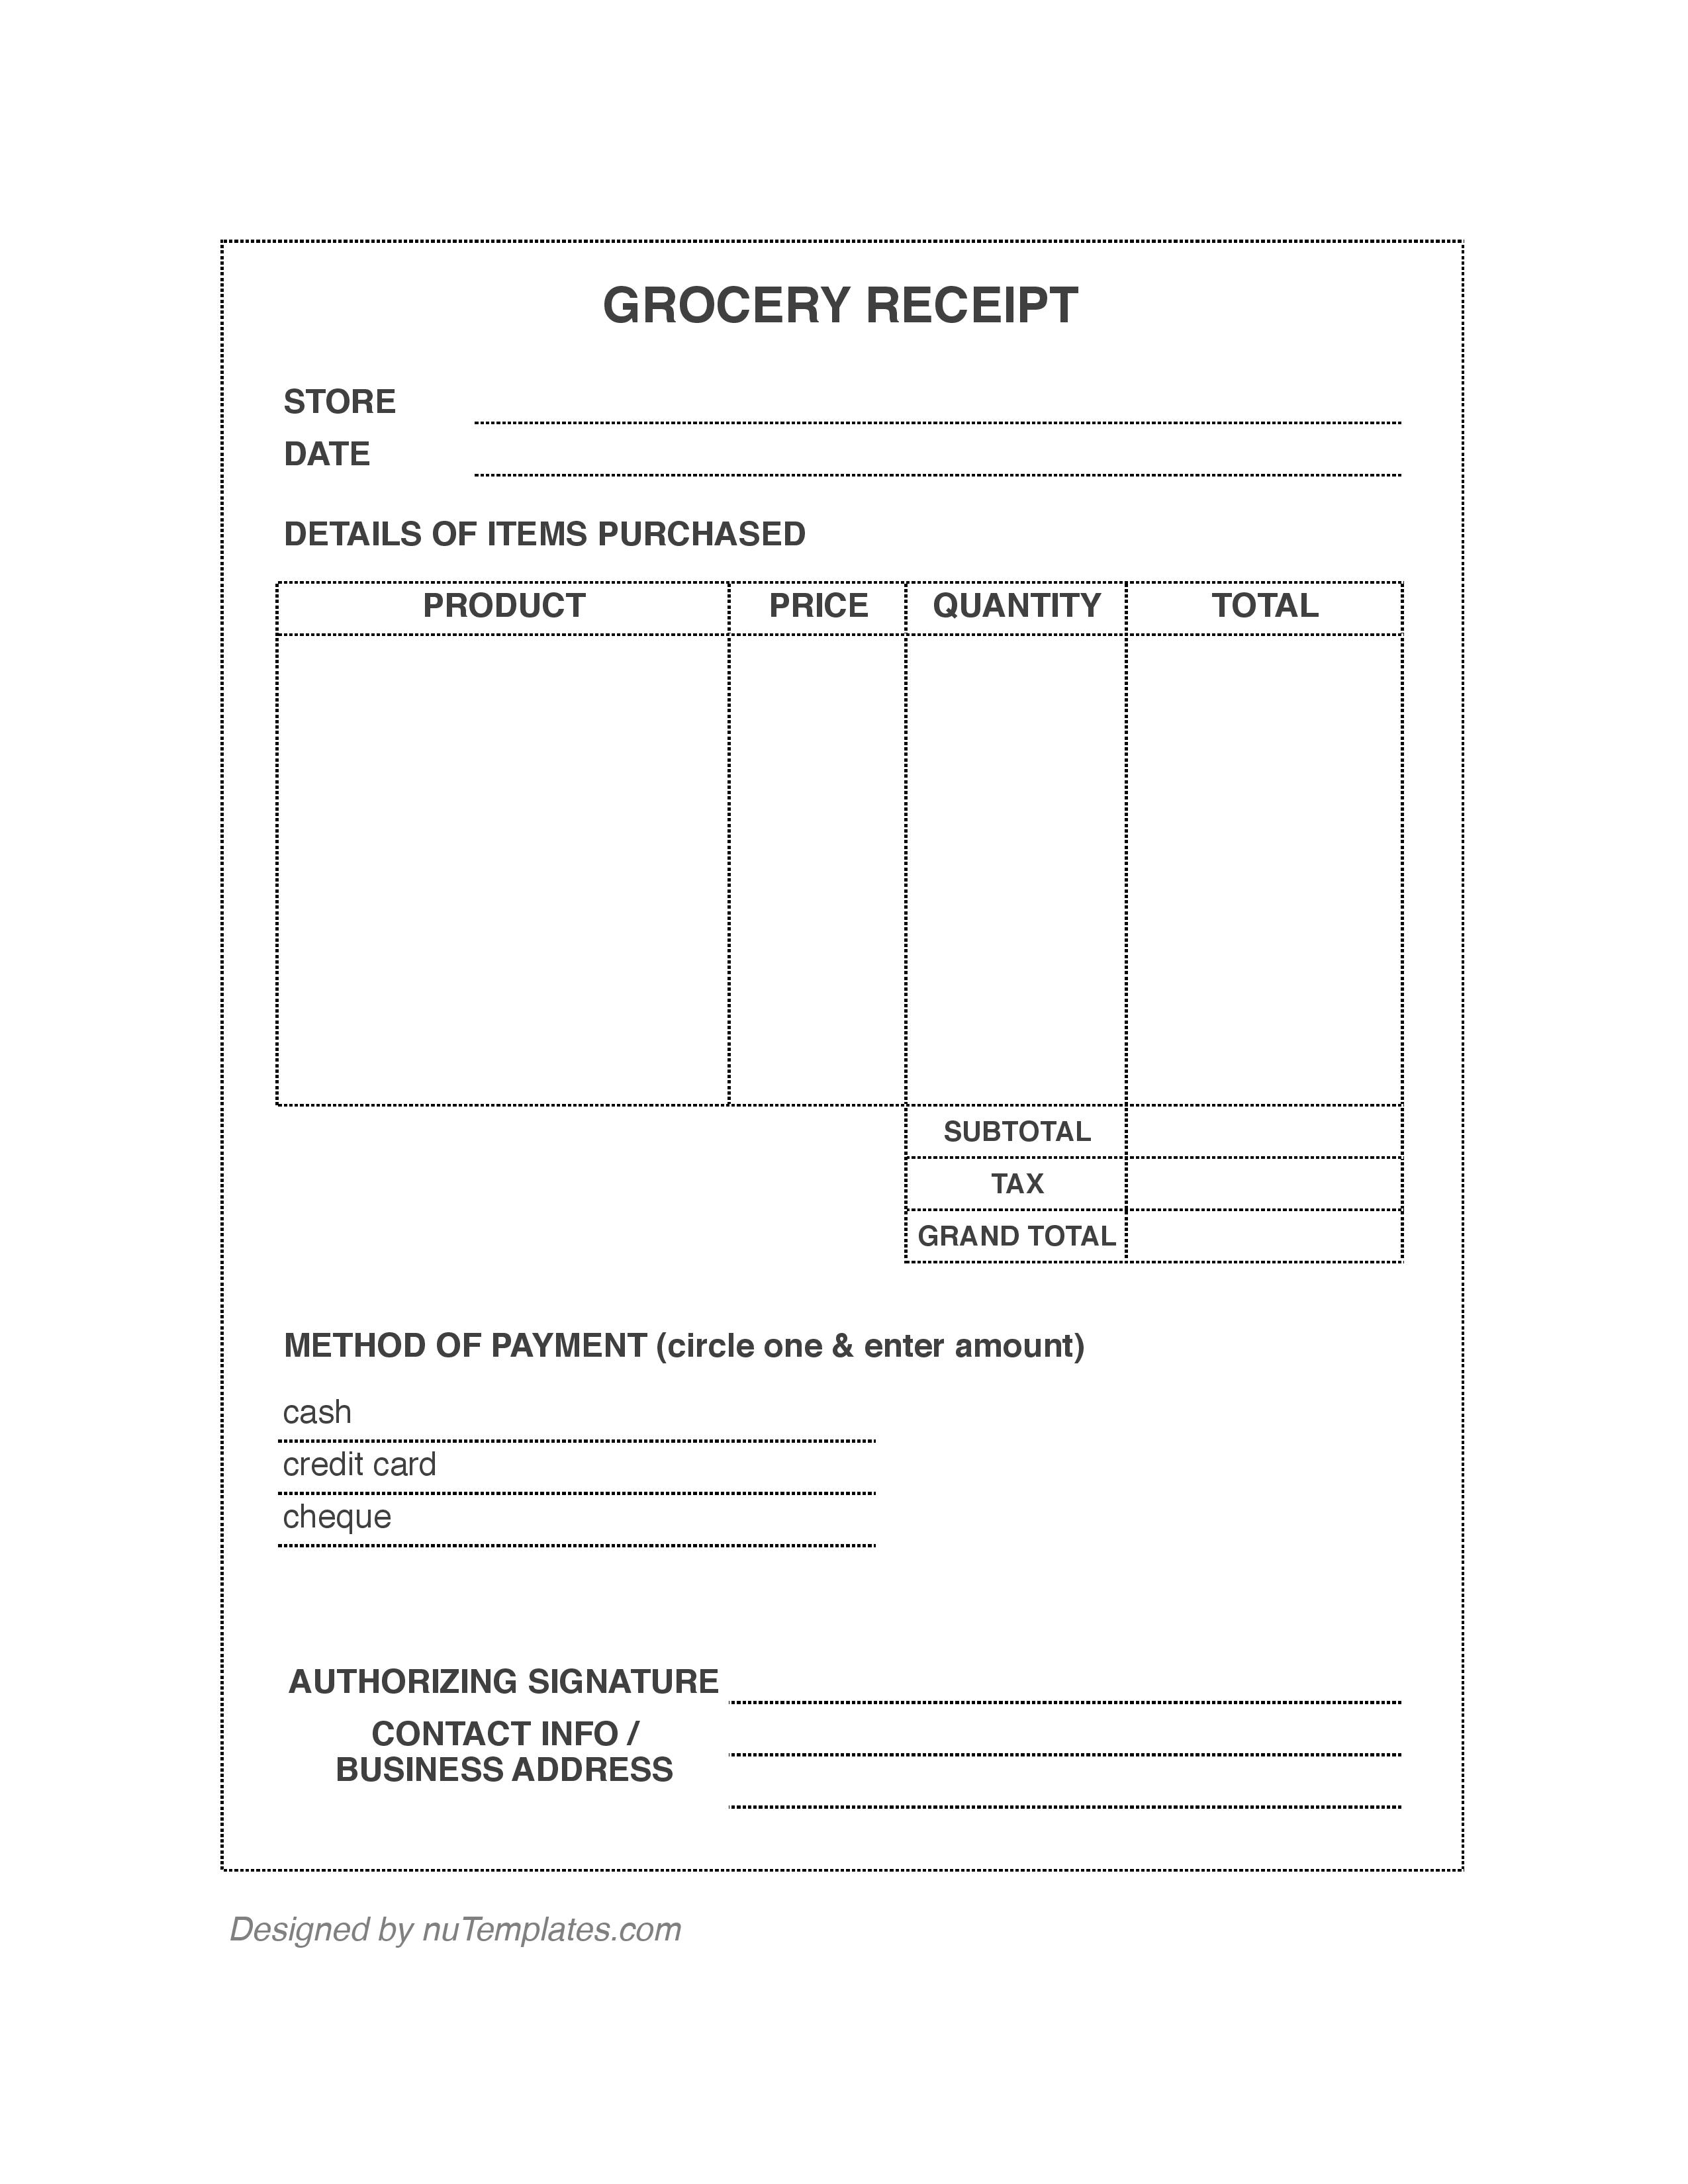 grocery-receipt-template-grocery-receipts-nutemplates